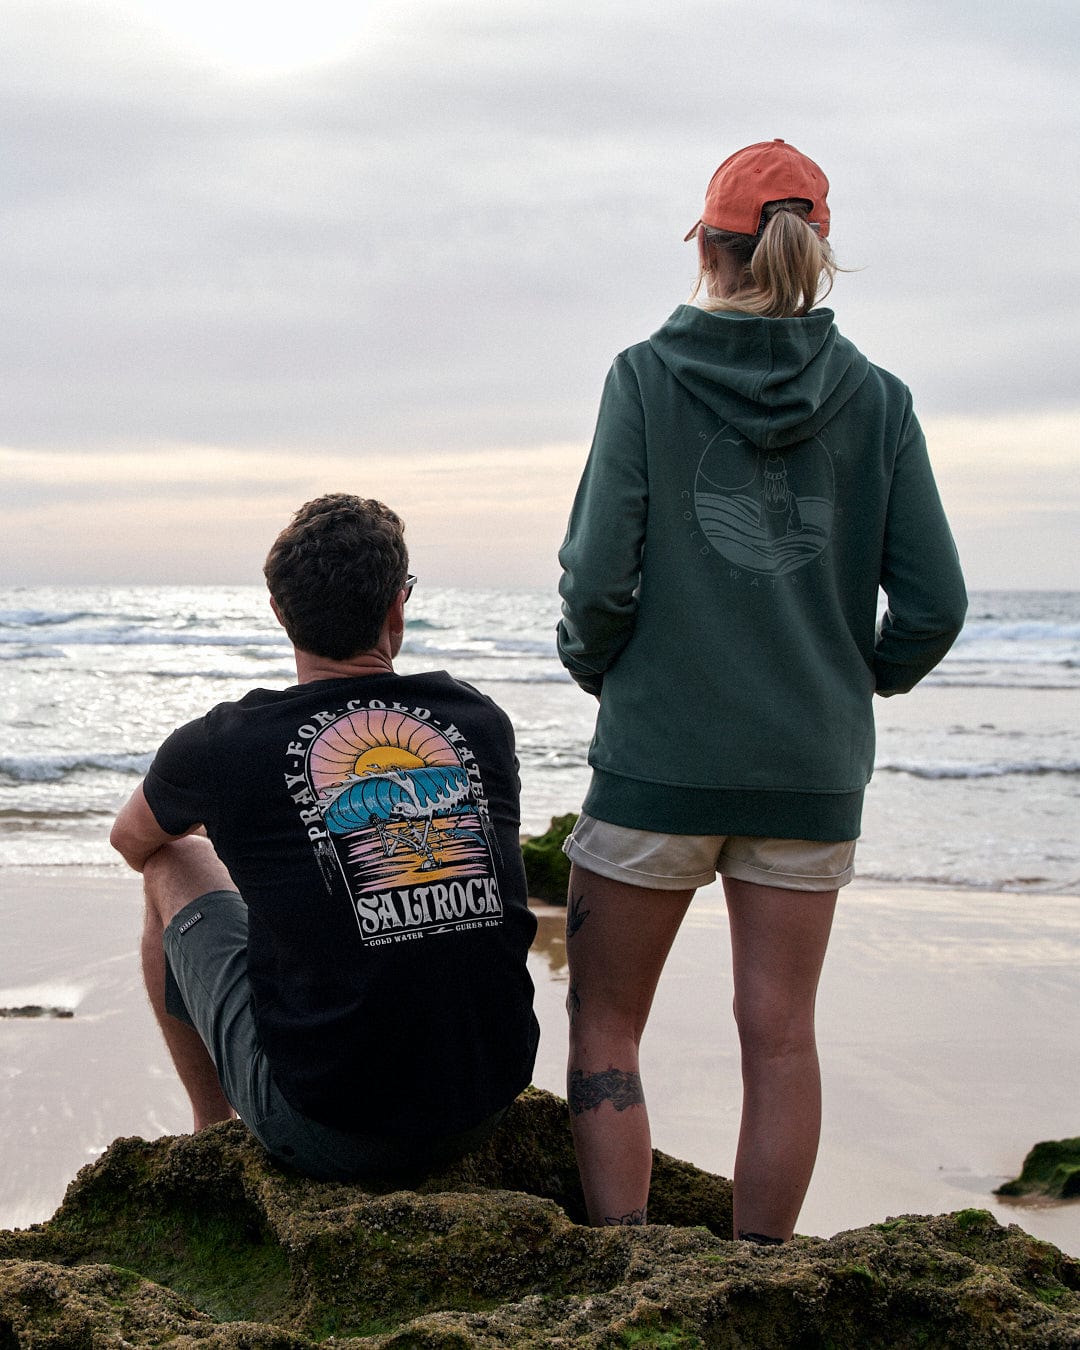 A man and woman sitting on Saltrock-branded Cold Water - Mens Short Sleeve T-Shirt - Black at the beach.